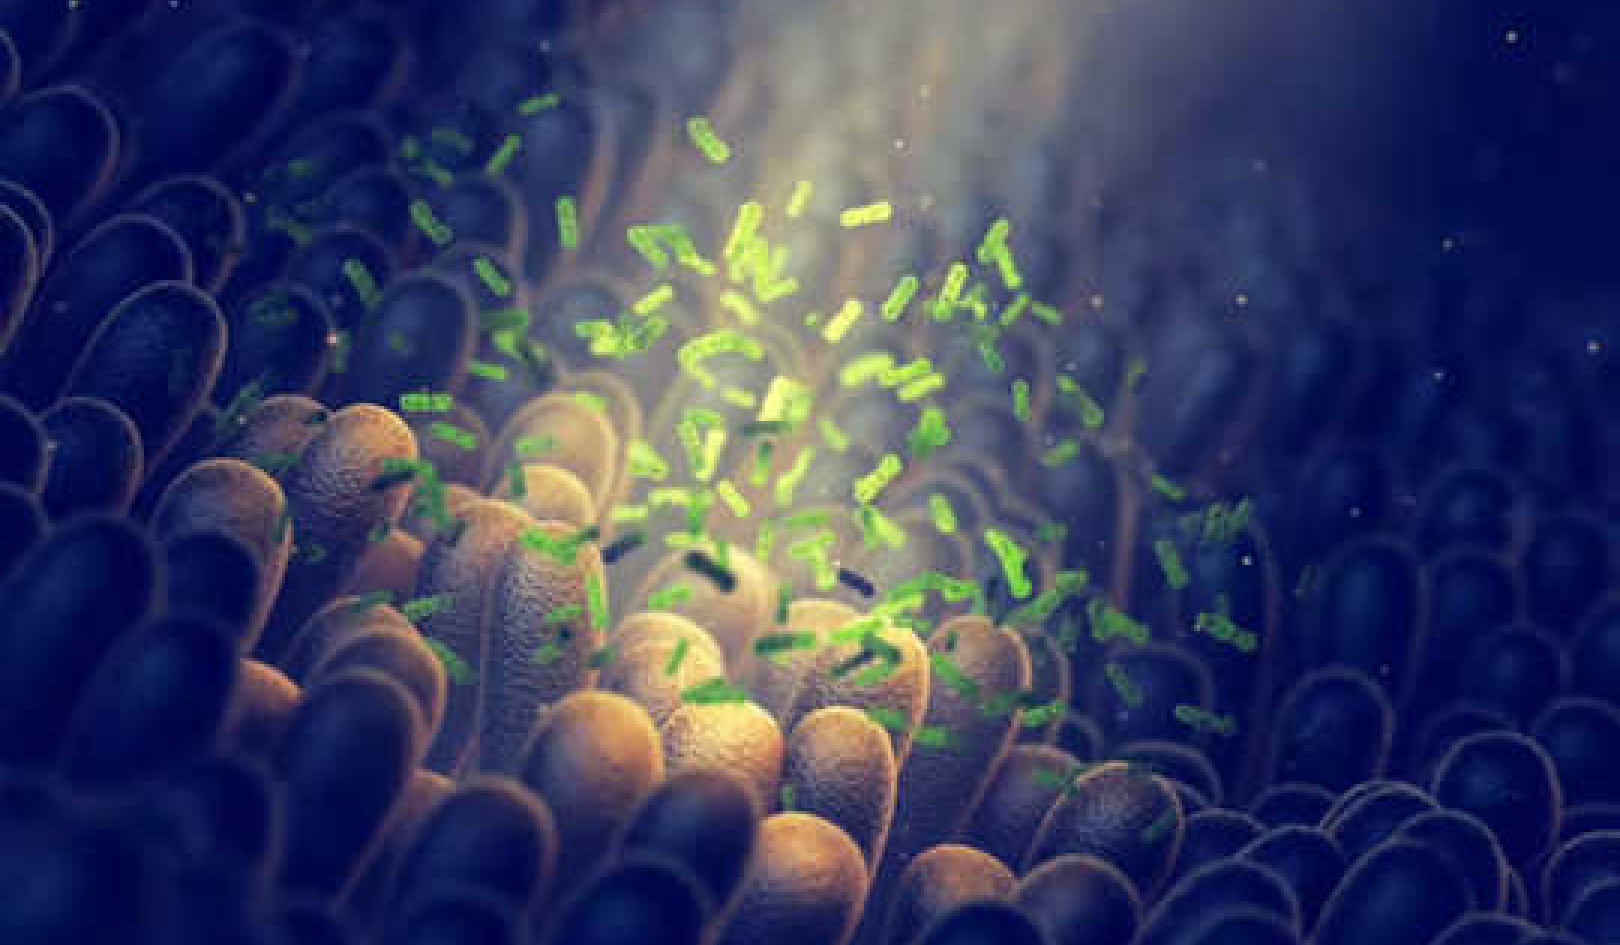 How Probiotics Help Regulate Our Immune System